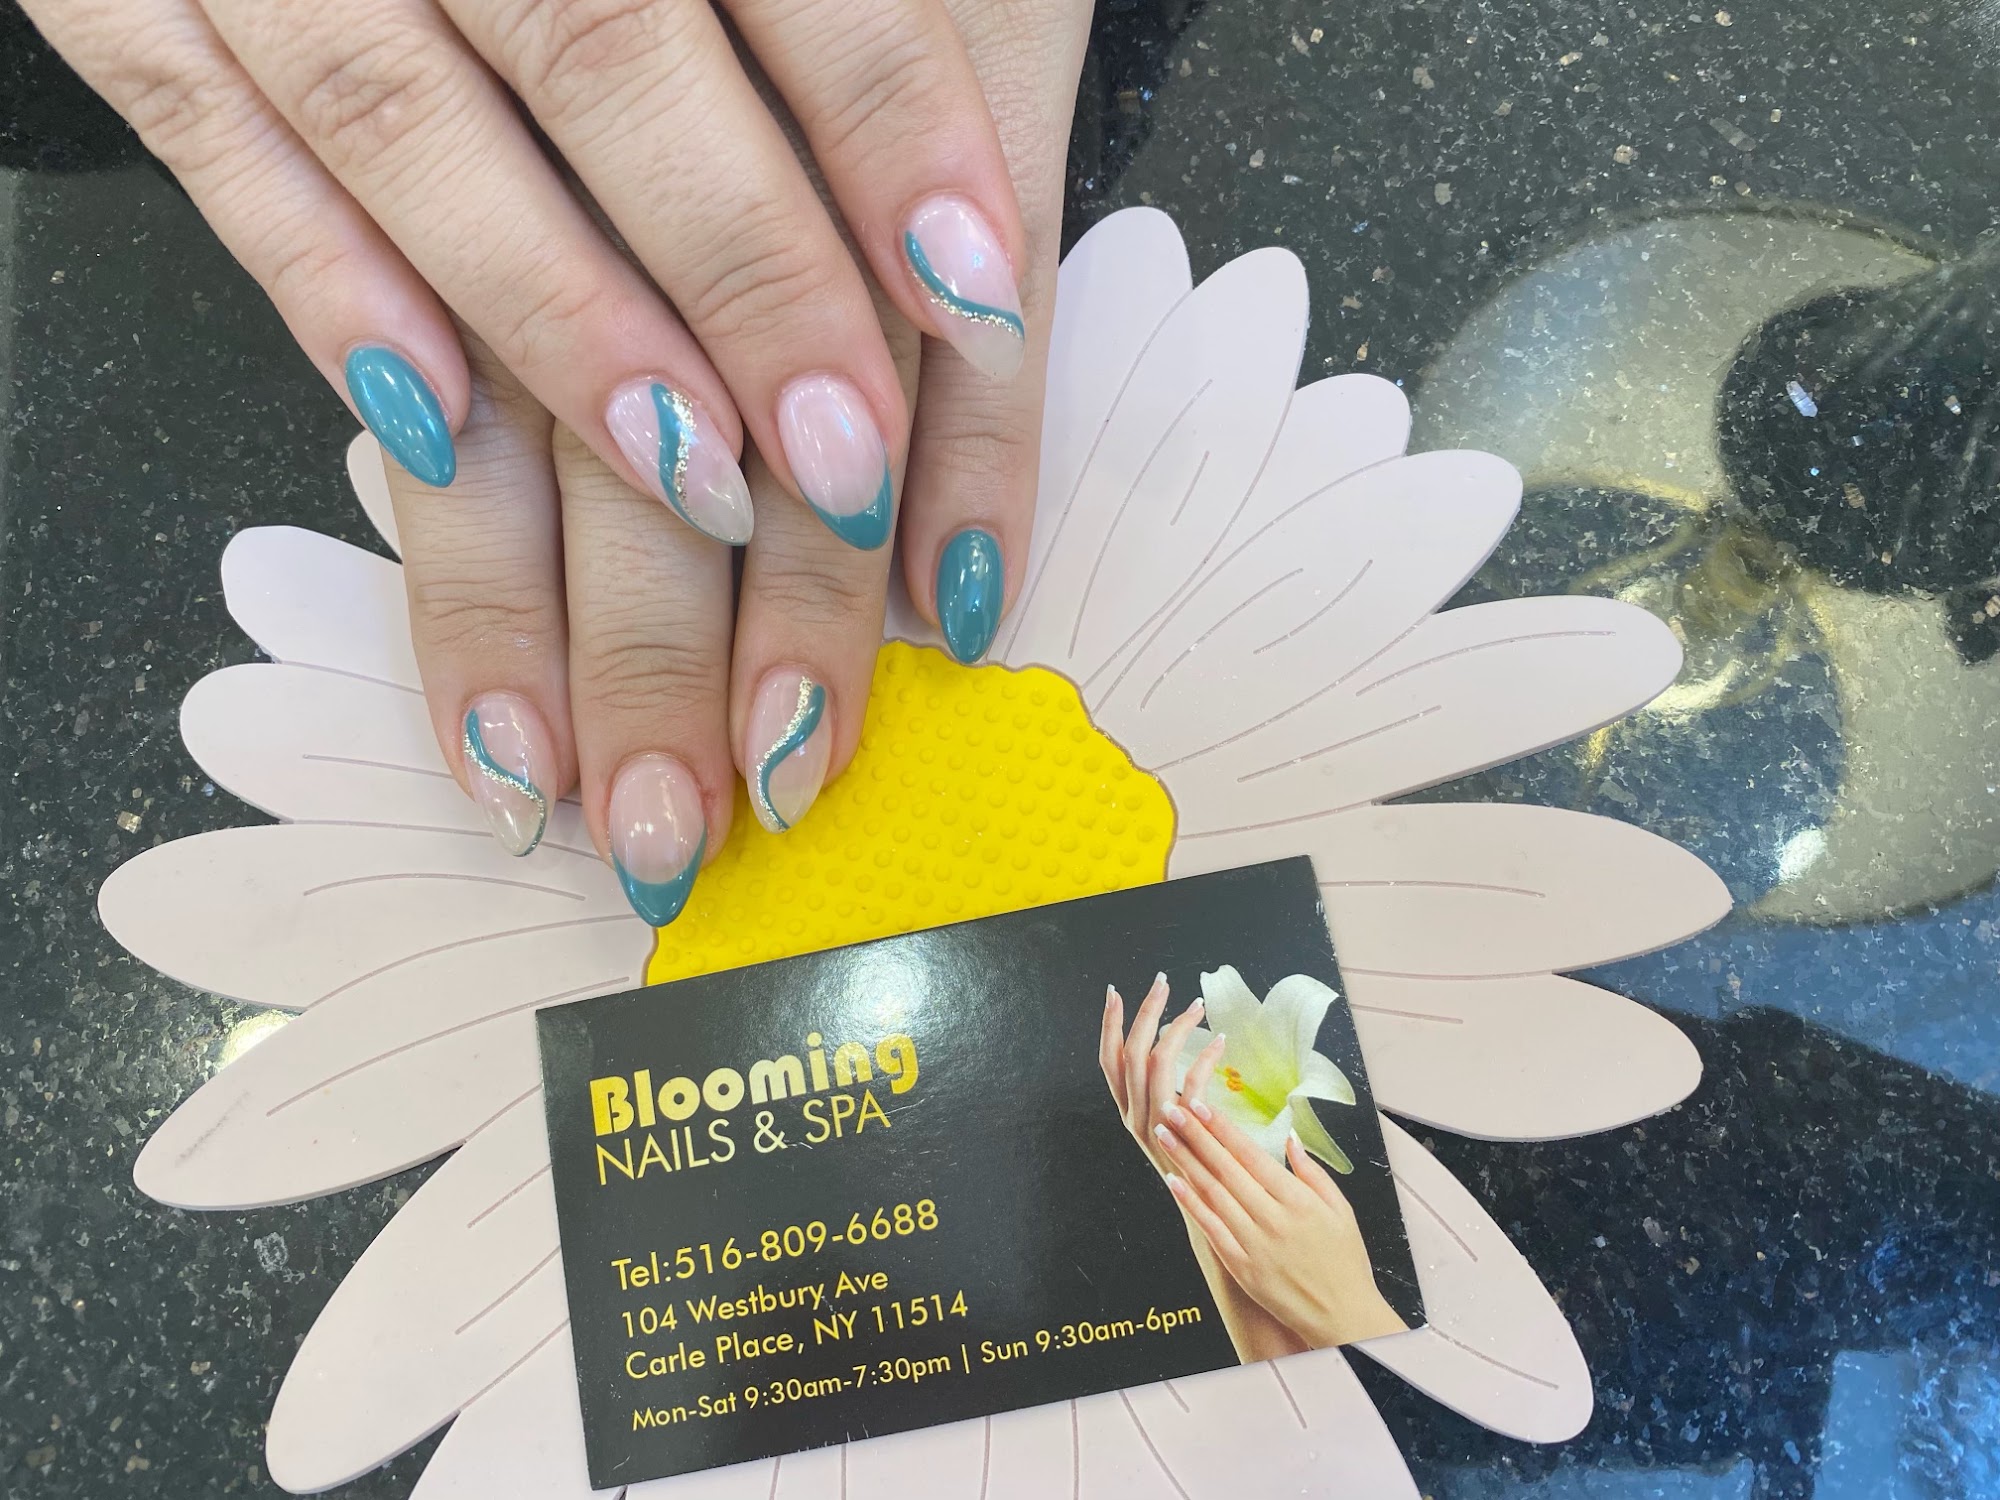 Blooming Nails & Spa 104 Westbury Ave, Carle Place New York 11514